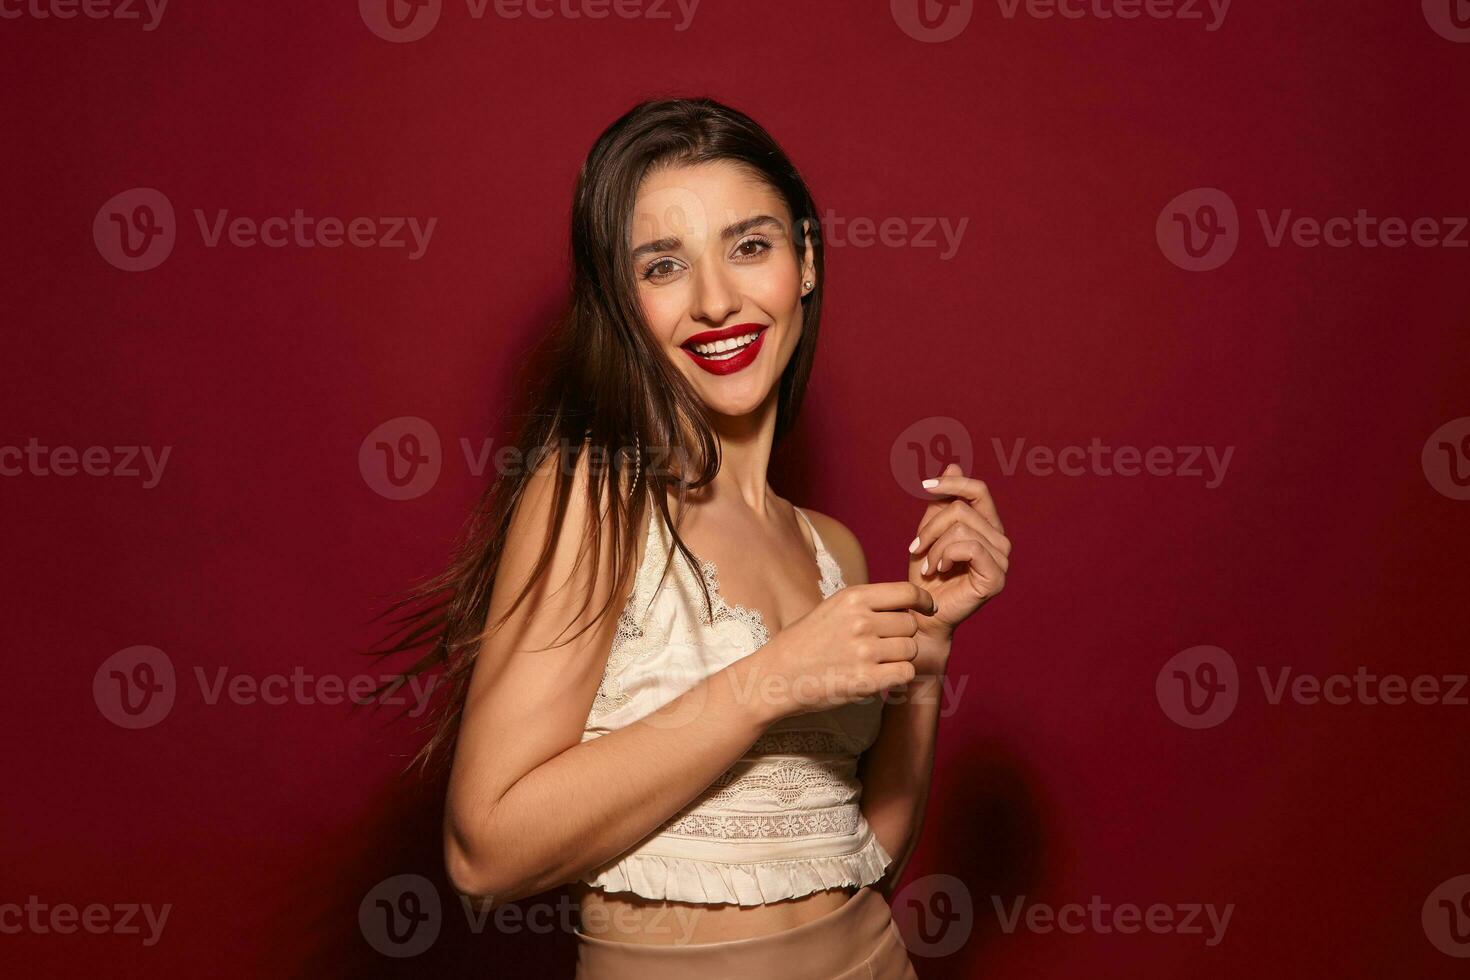 Cheerful young brown-eyed long haired brunette woman with festive makeup looking happily at camera with broad smile and keeping her hands raised while posing over burgundy background photo